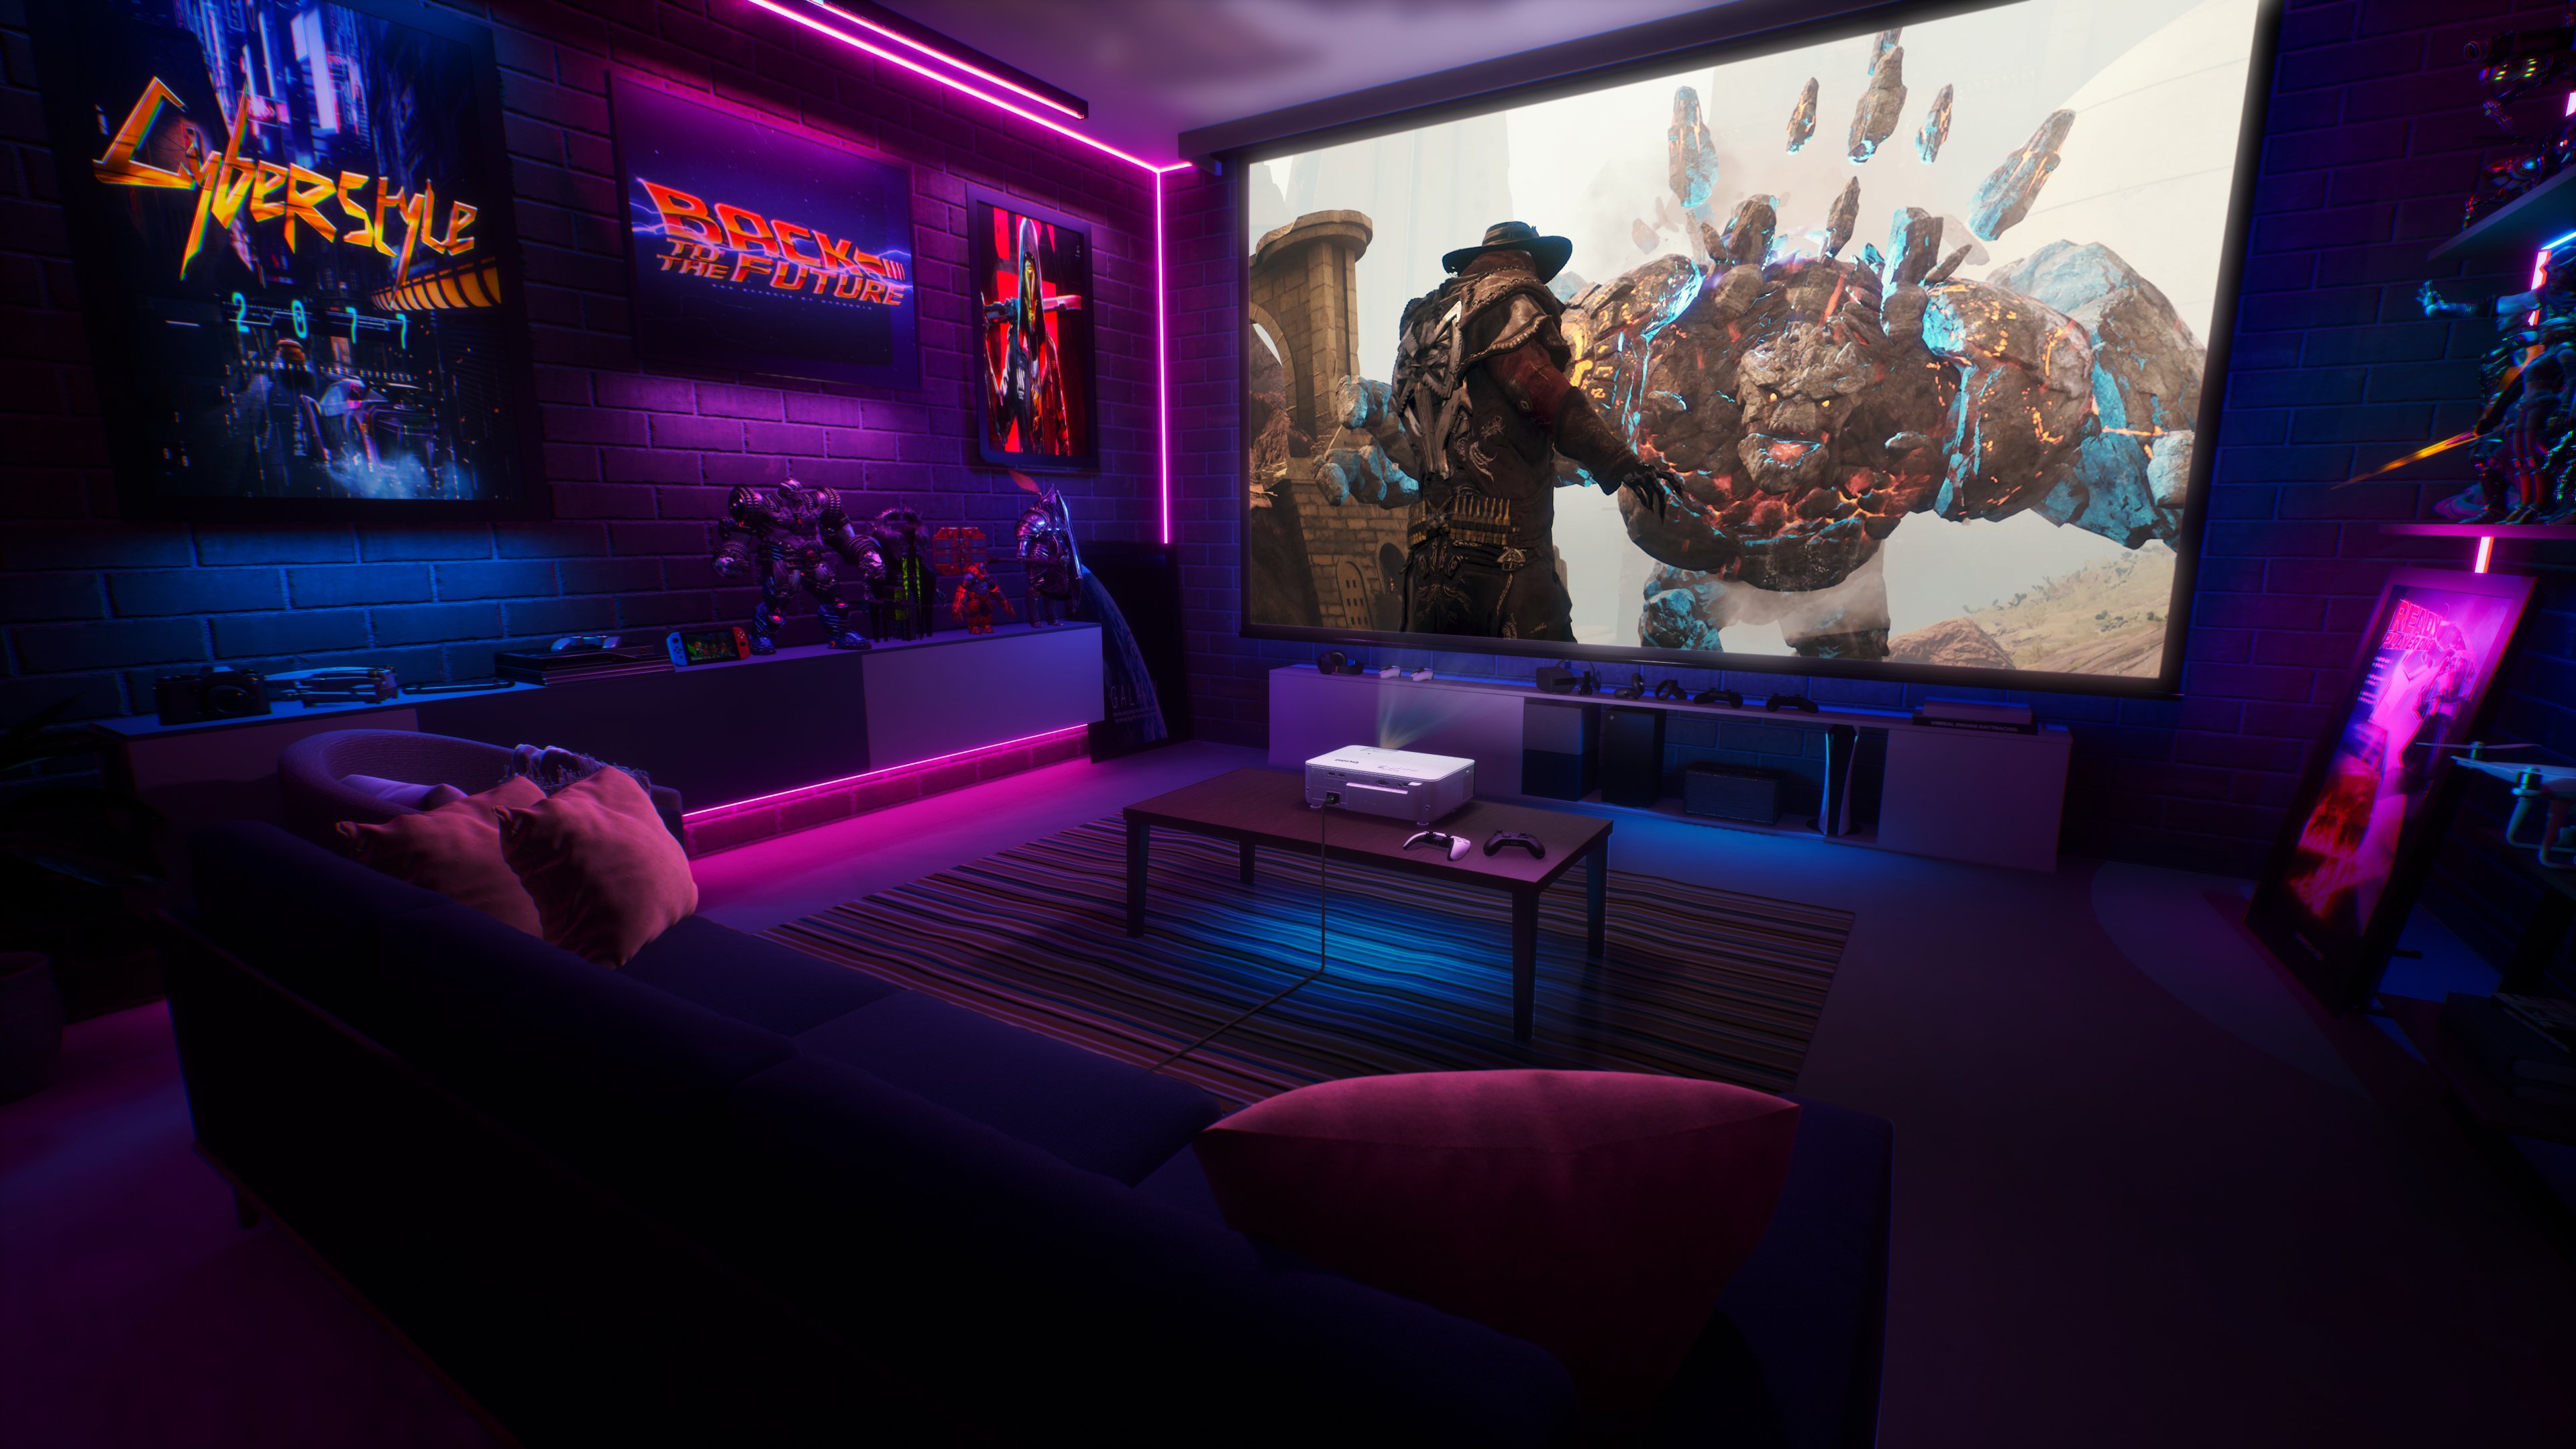 Bedachtzaam microfoon Zus 8 Cool Gaming Room Ideas | BenQ US